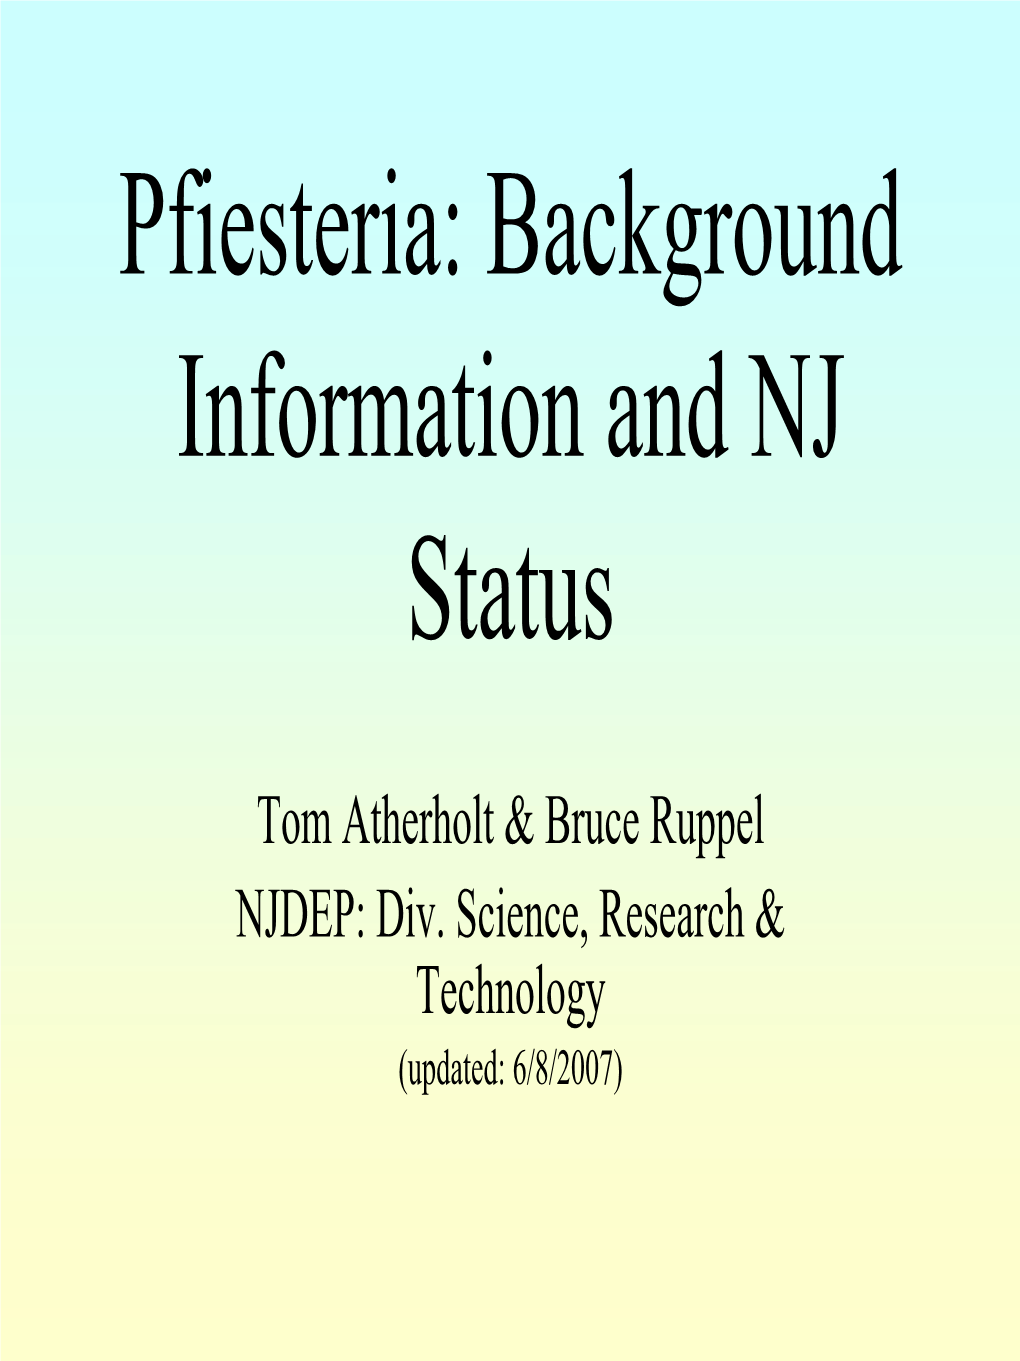 Pfiesteria: Background Information and NJ Status